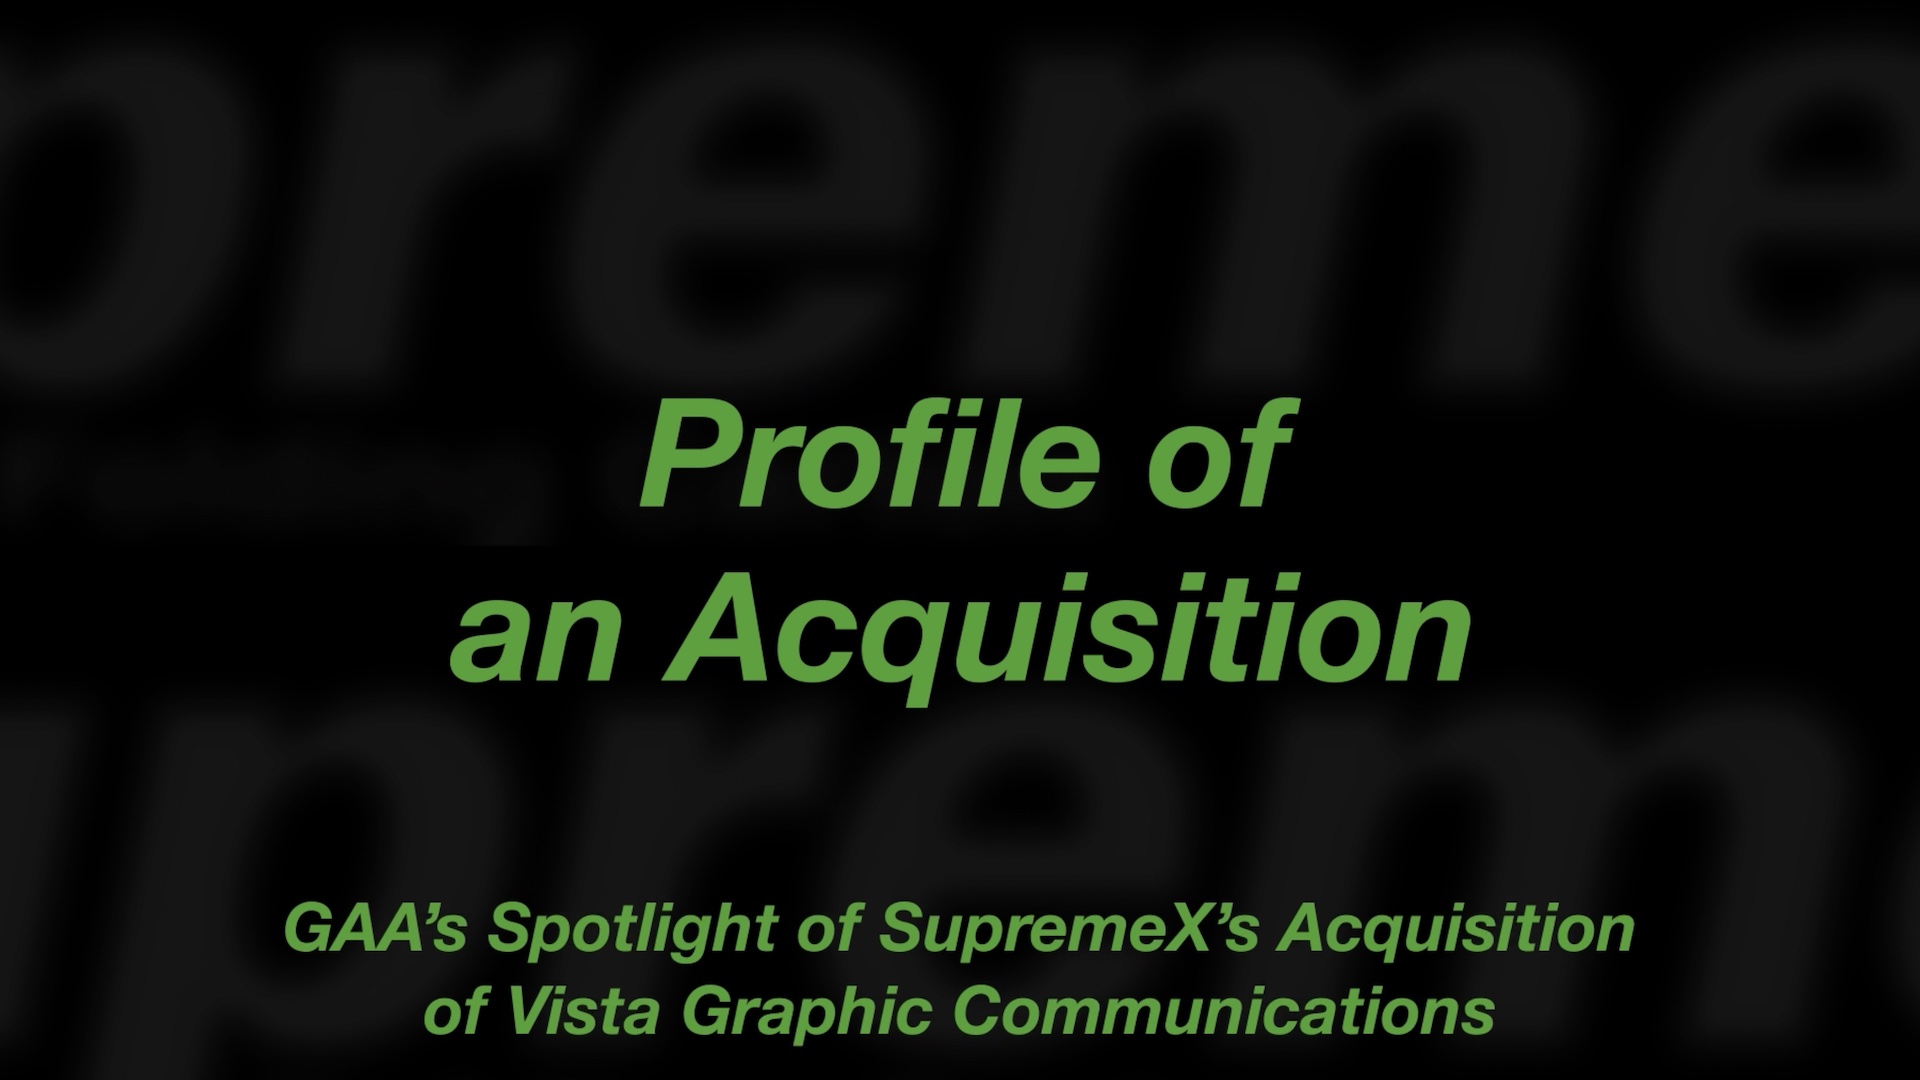 The Target Report Interview: SupremeX Acquisition of Vista Graphic Communications